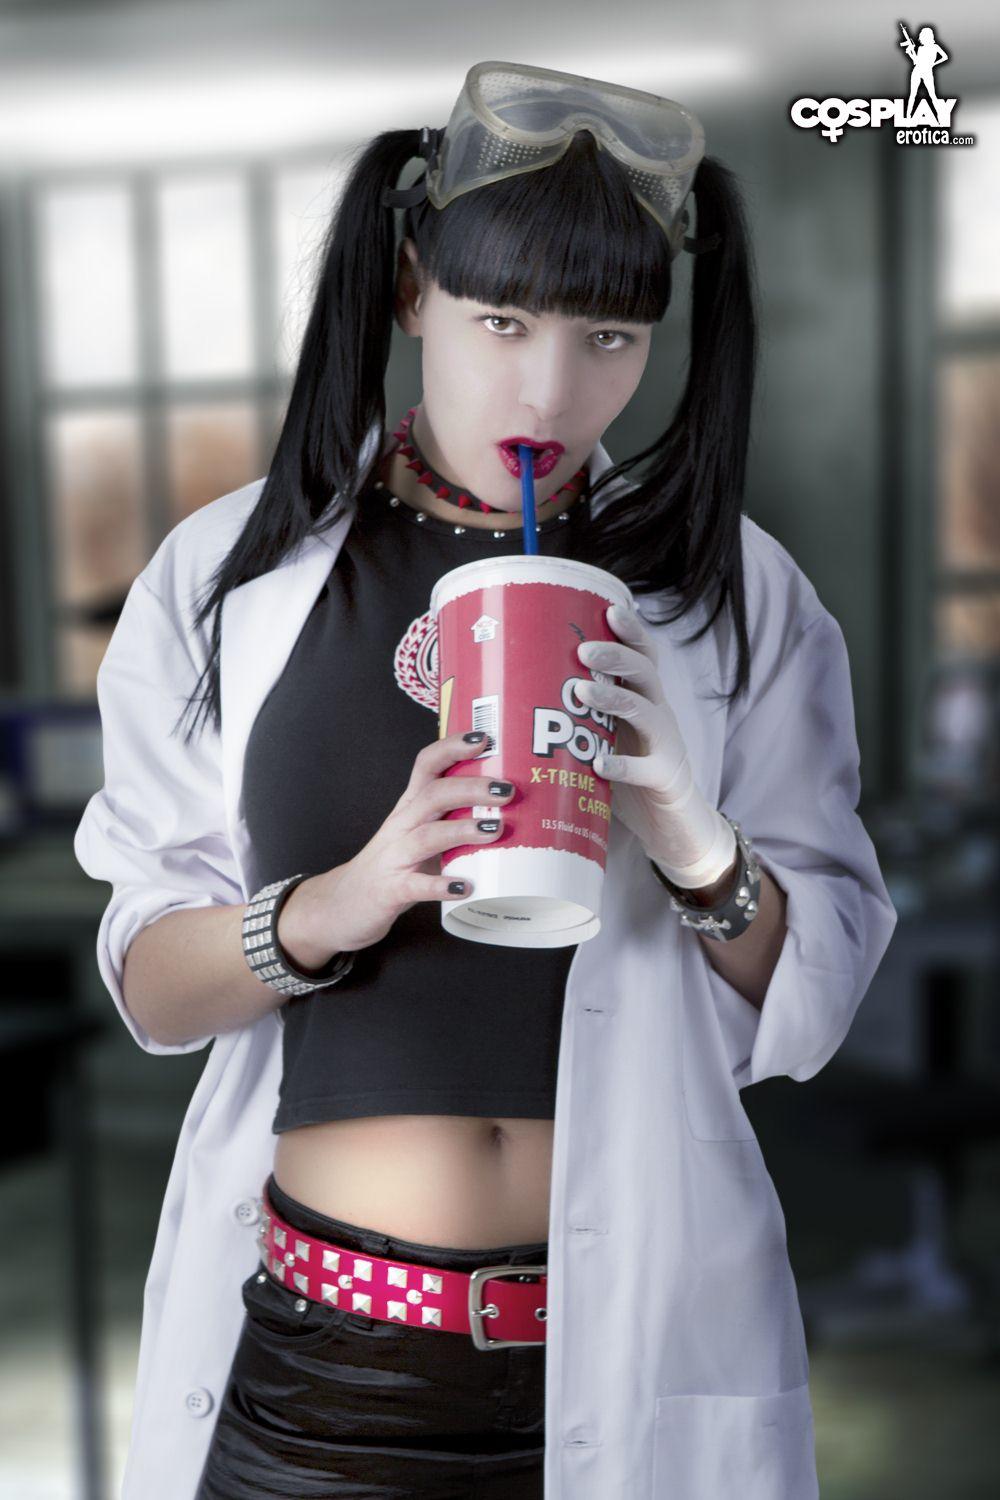 Pictures of smart and sexy cosplayer Mea Lee dressed as Abby from NCIS #59445606